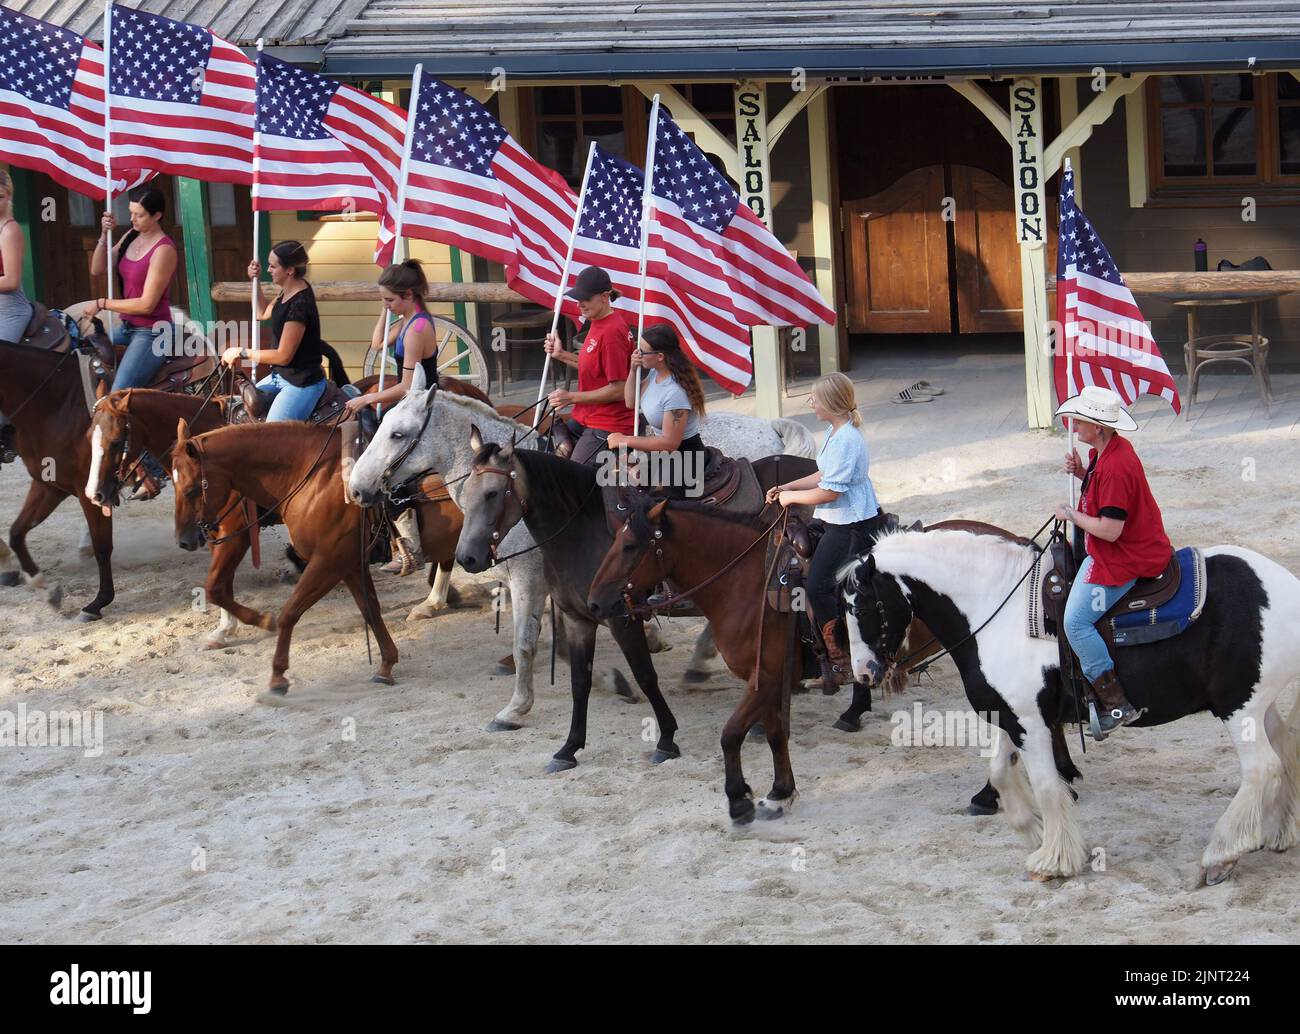 Participants of the Pullman City Equestrian Theater at the rehearsal of the performance. They are holding American flags. Stock Photo